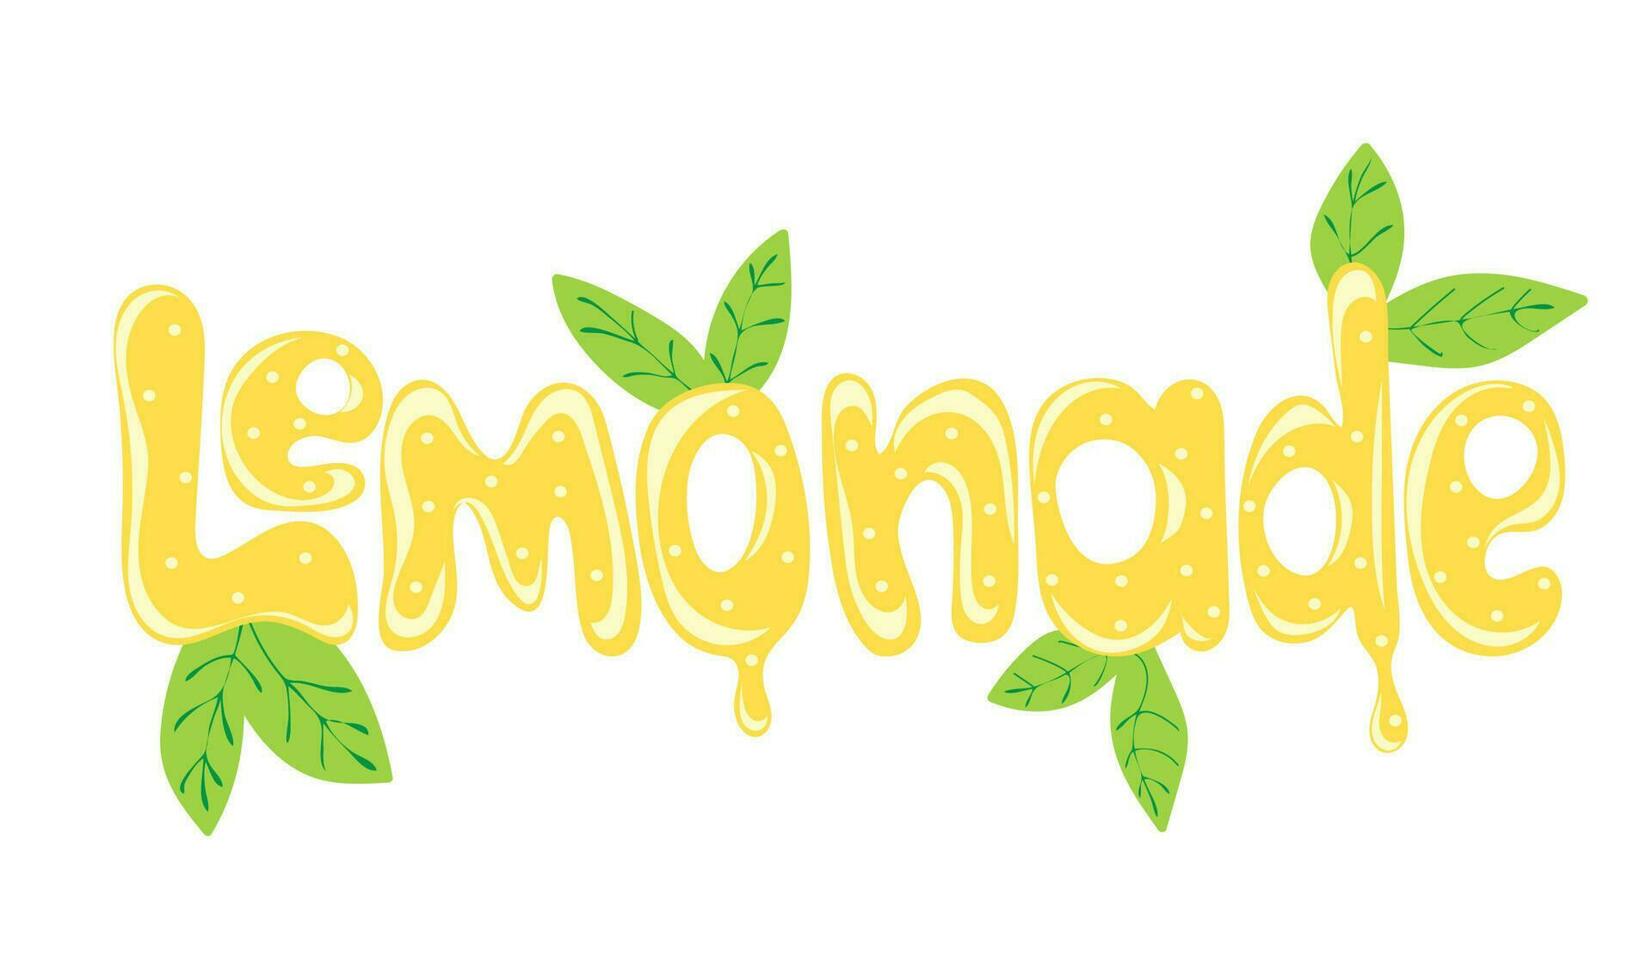 Lemonade handwritten text with leaves isolated on white background vector